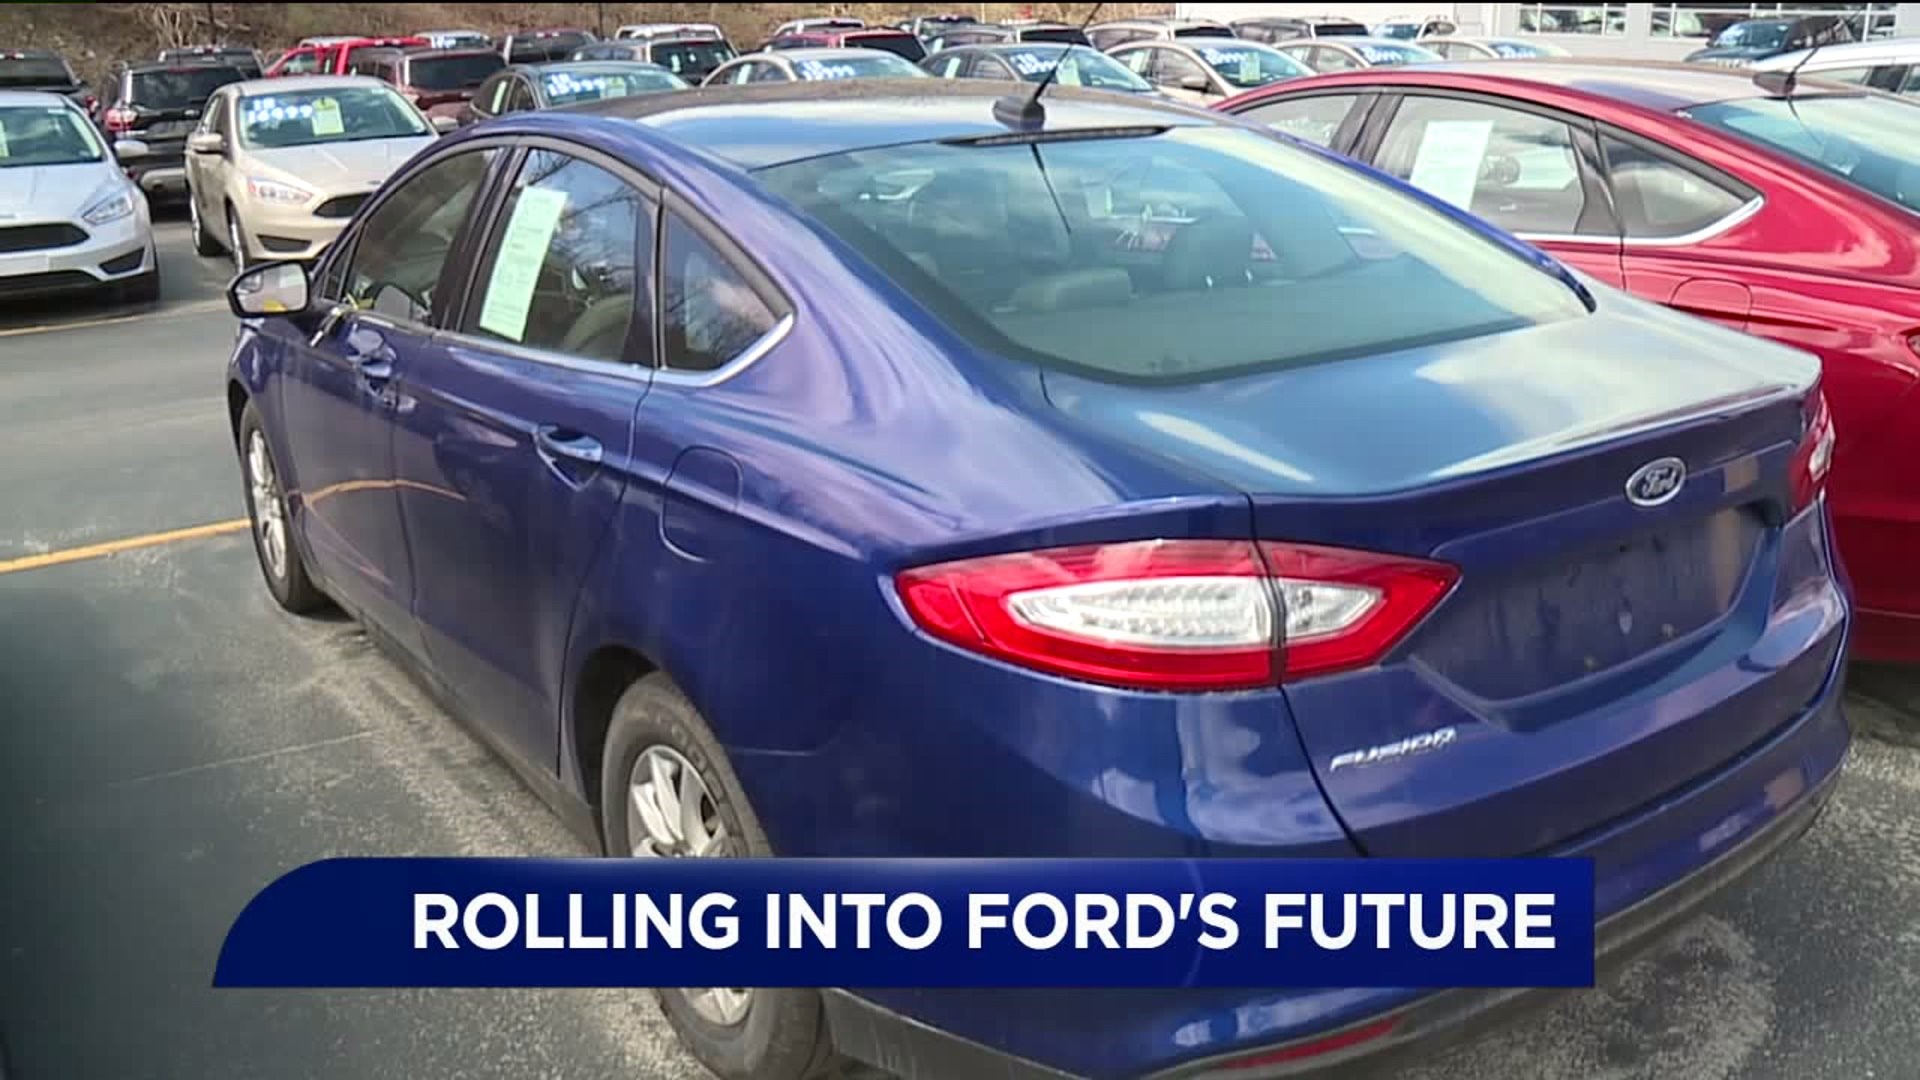 Scene Changing at Ford Dealerships as Cars are Phased Out